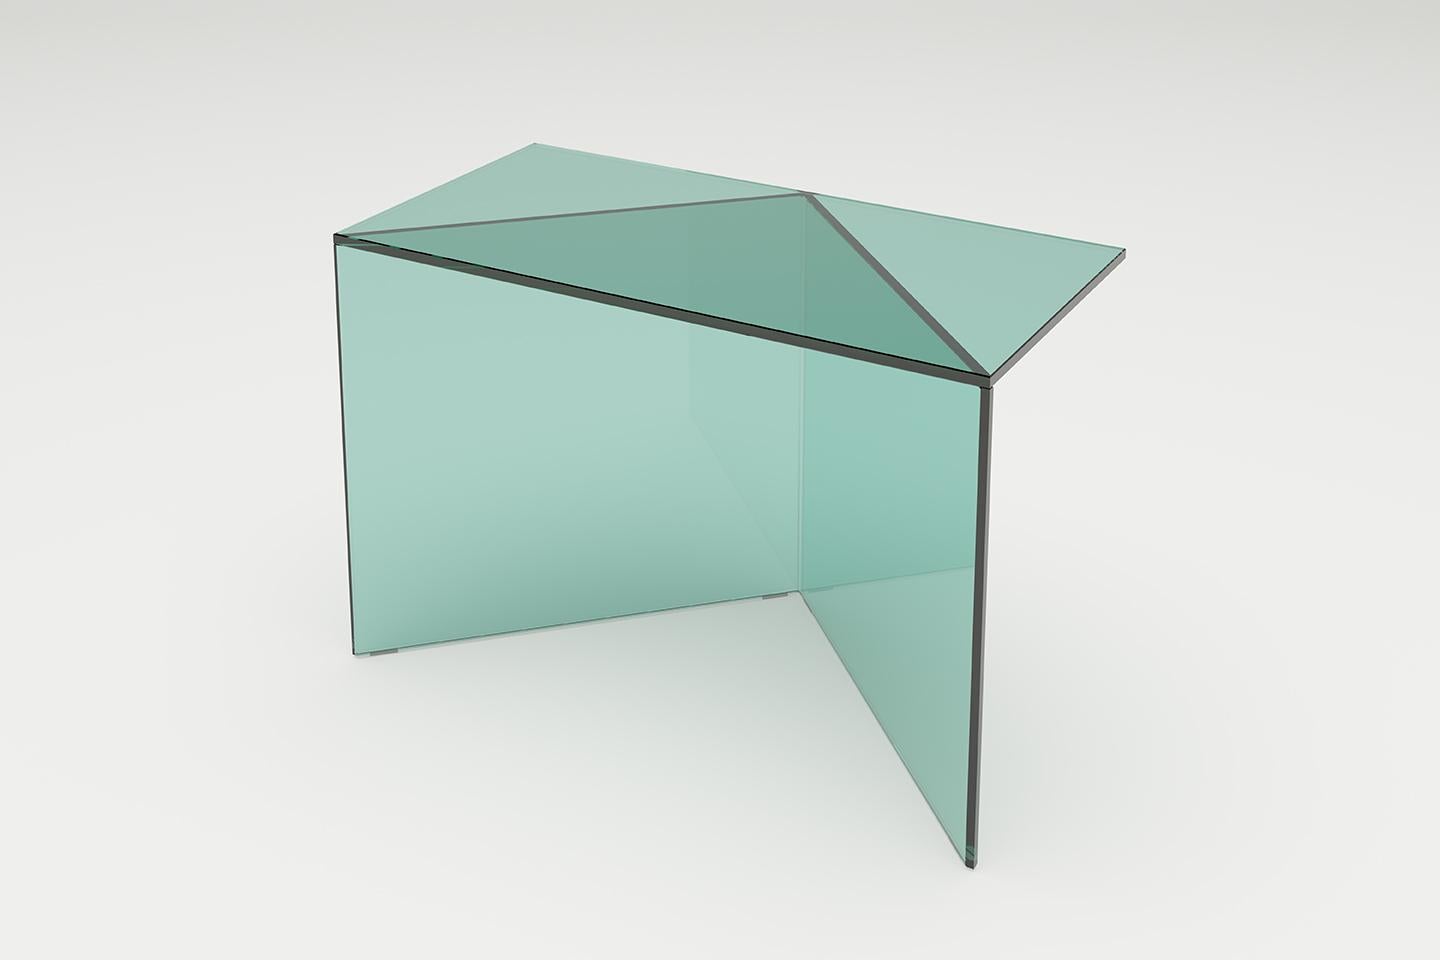 Green Glass Poly square coffe table by Sebastian Scherer
Dimensions: D60 x W30 x H40 cm
Materials: Solid coloured glass.
Weight: 12.7 kg.
Also Available: Colours:Clear white (transparent) / clear green / clear blue / clear bronze / clear